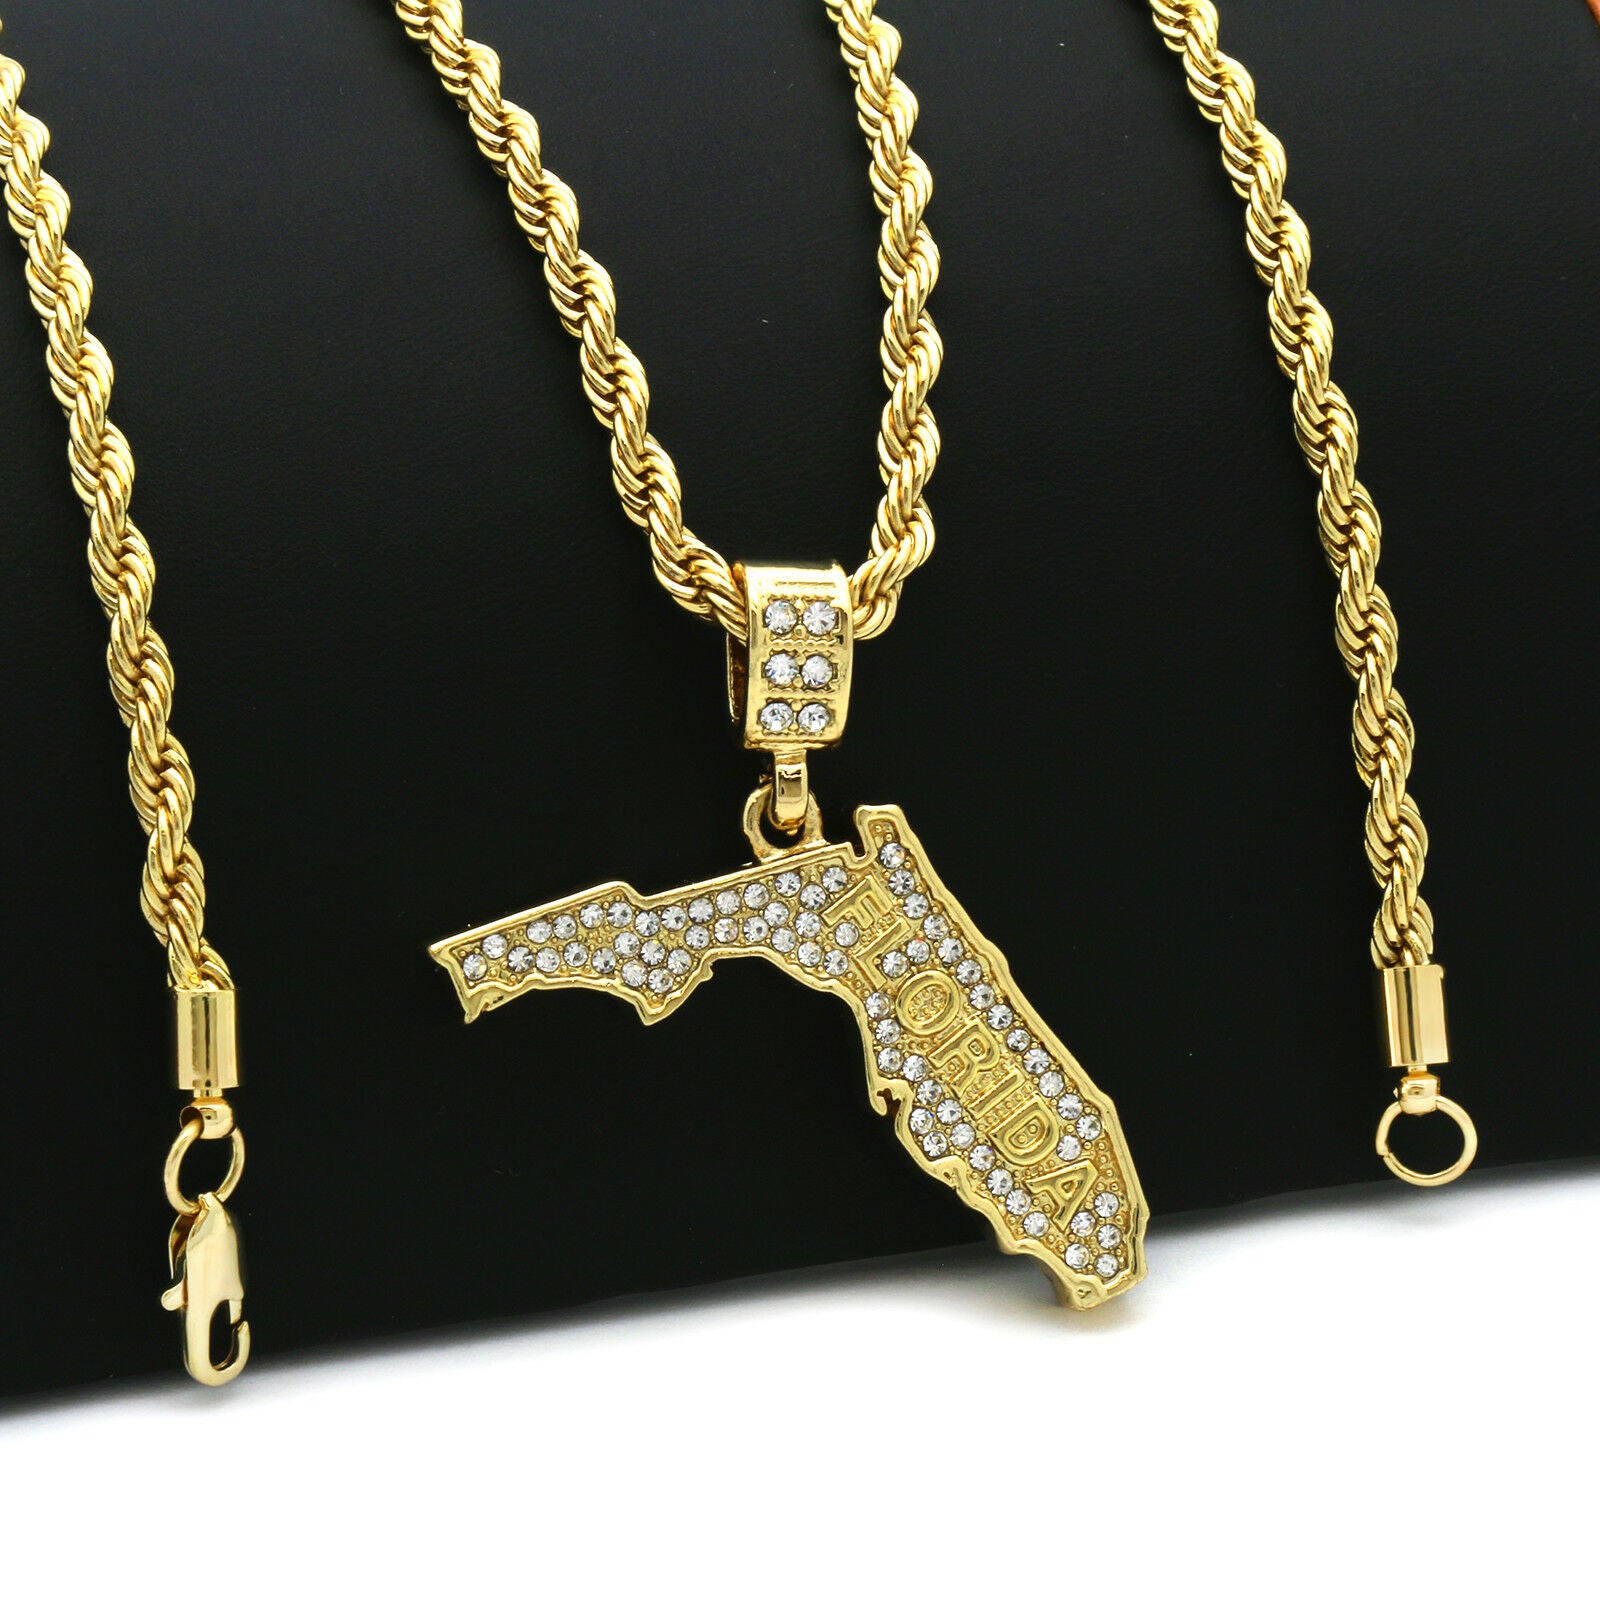 L2JK Hip Hop 14K Gold Plated Iced Centenario Pendant 24 Rope Chain Bling Necklace